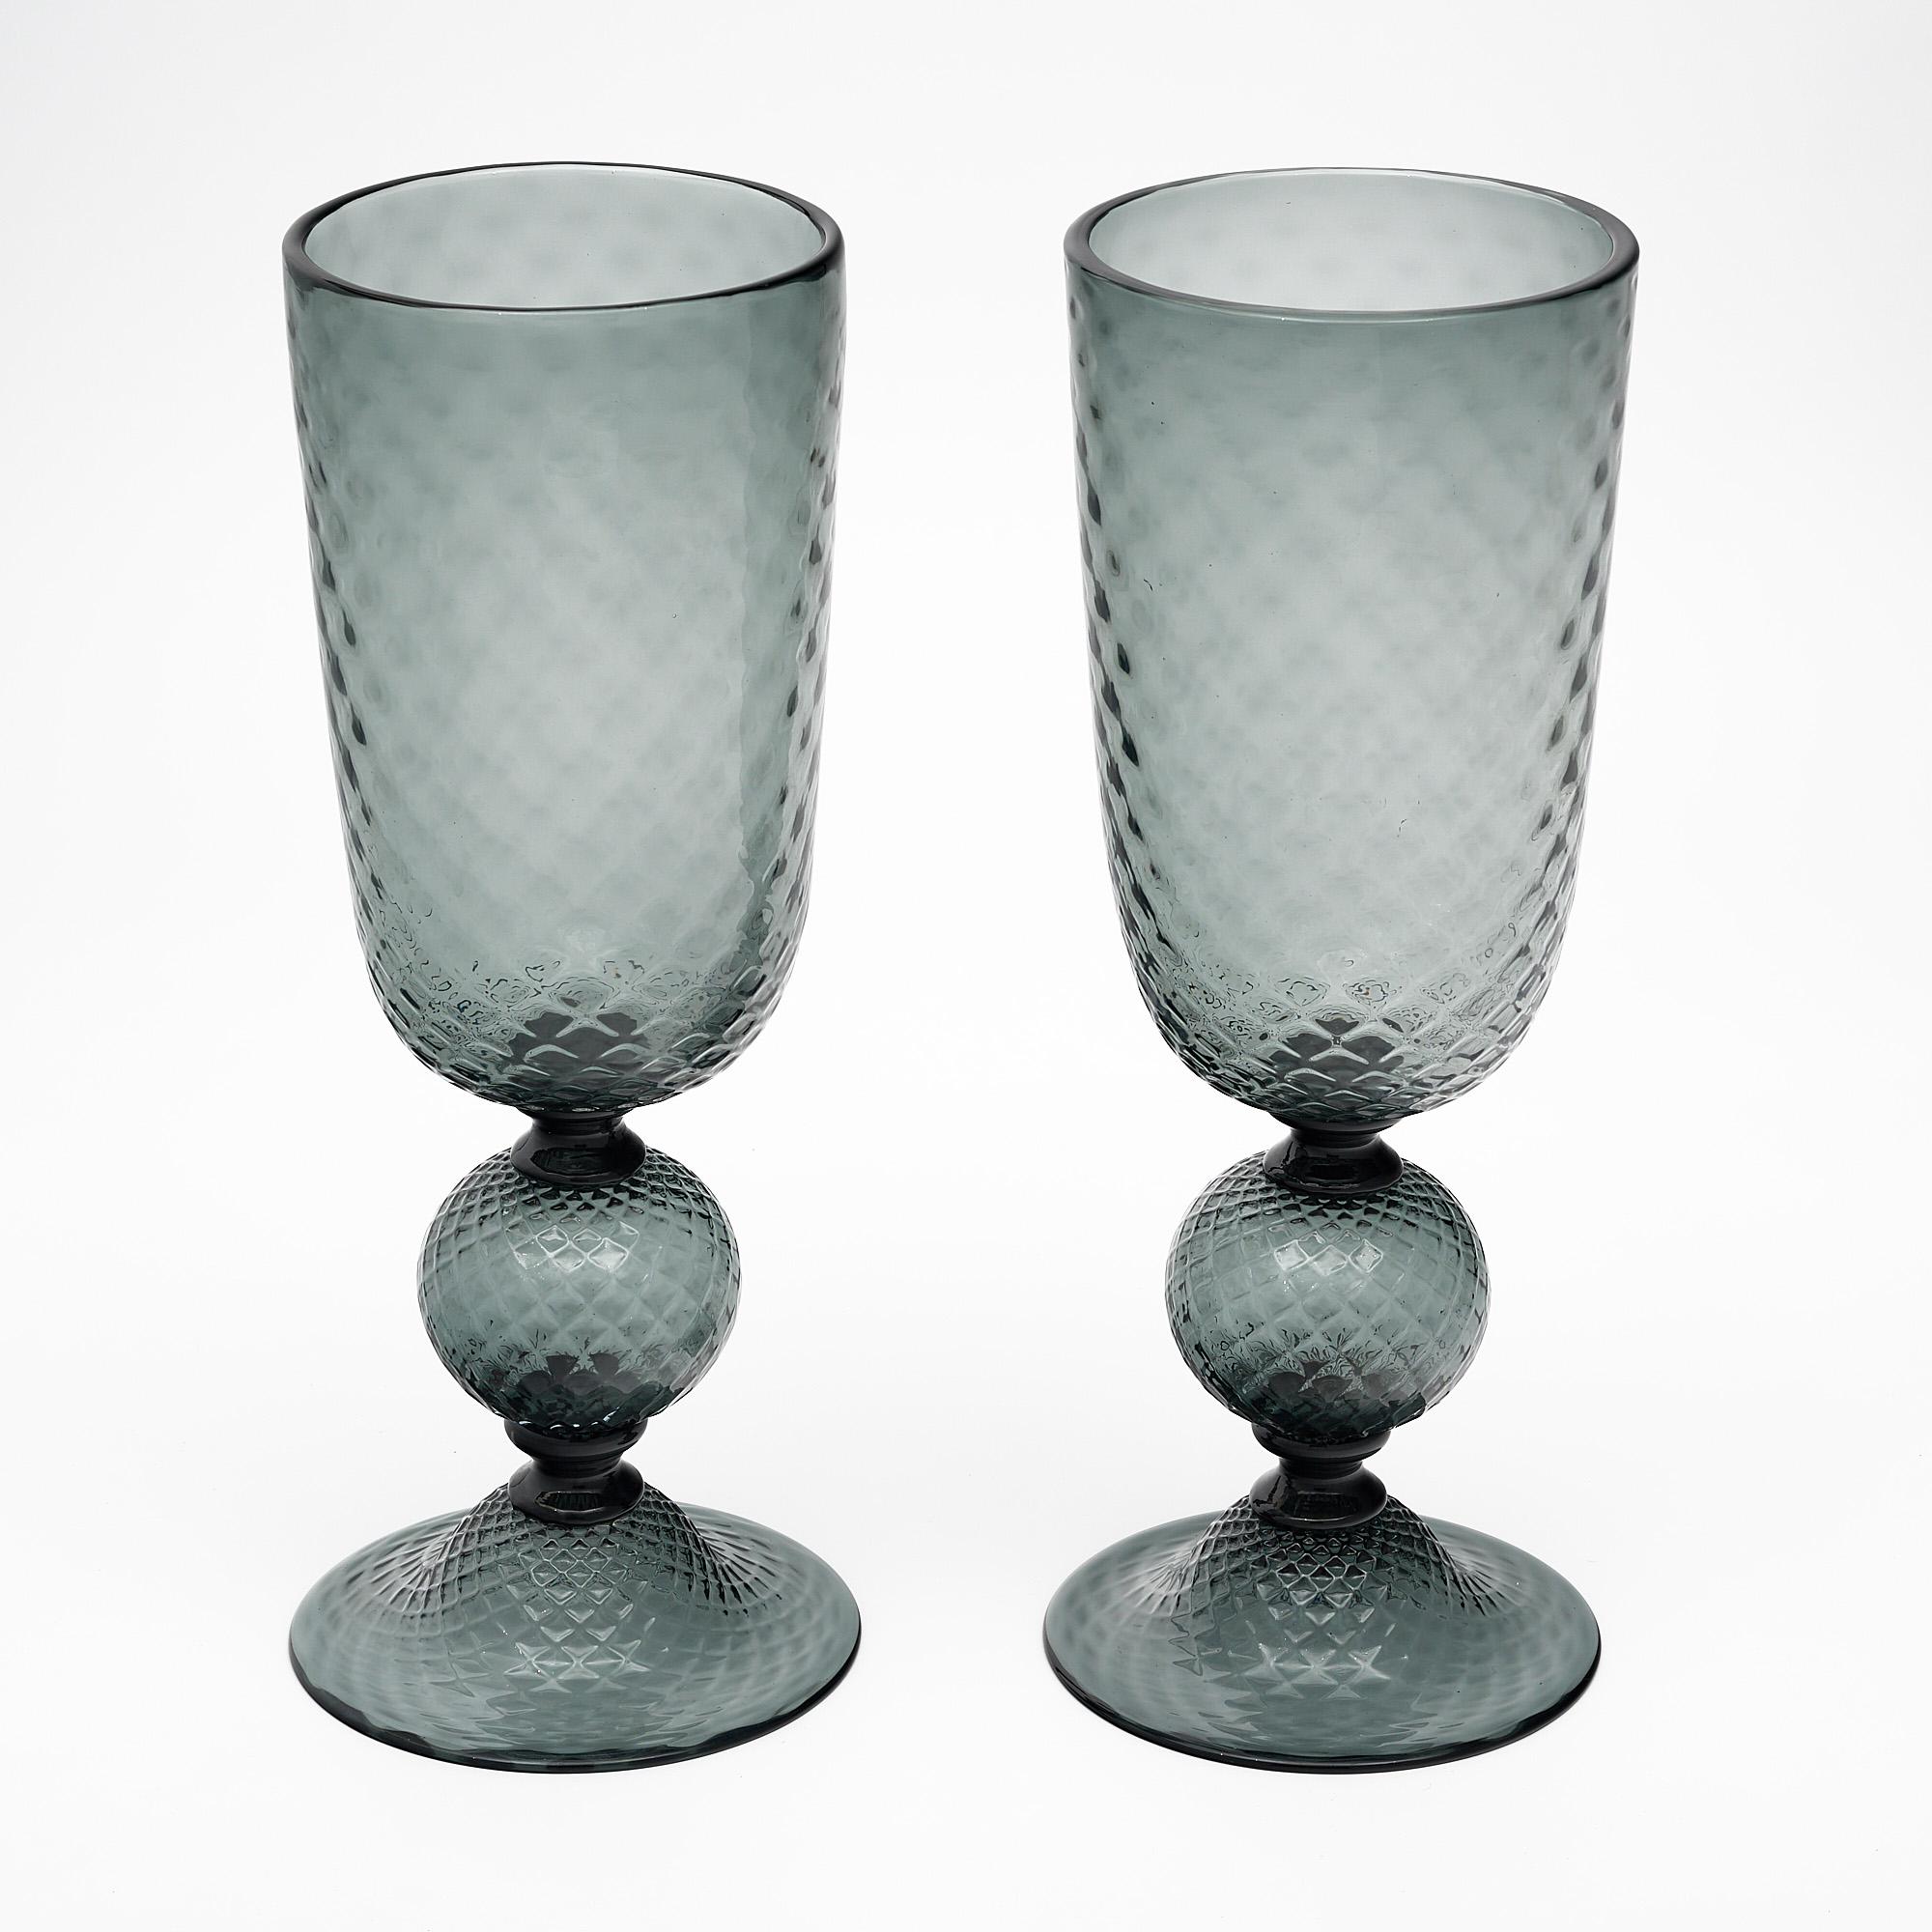 A pair of Murano glass urns made of hand blown glass in a charcoal gray tone. They are crafted in the “baloton” technique.